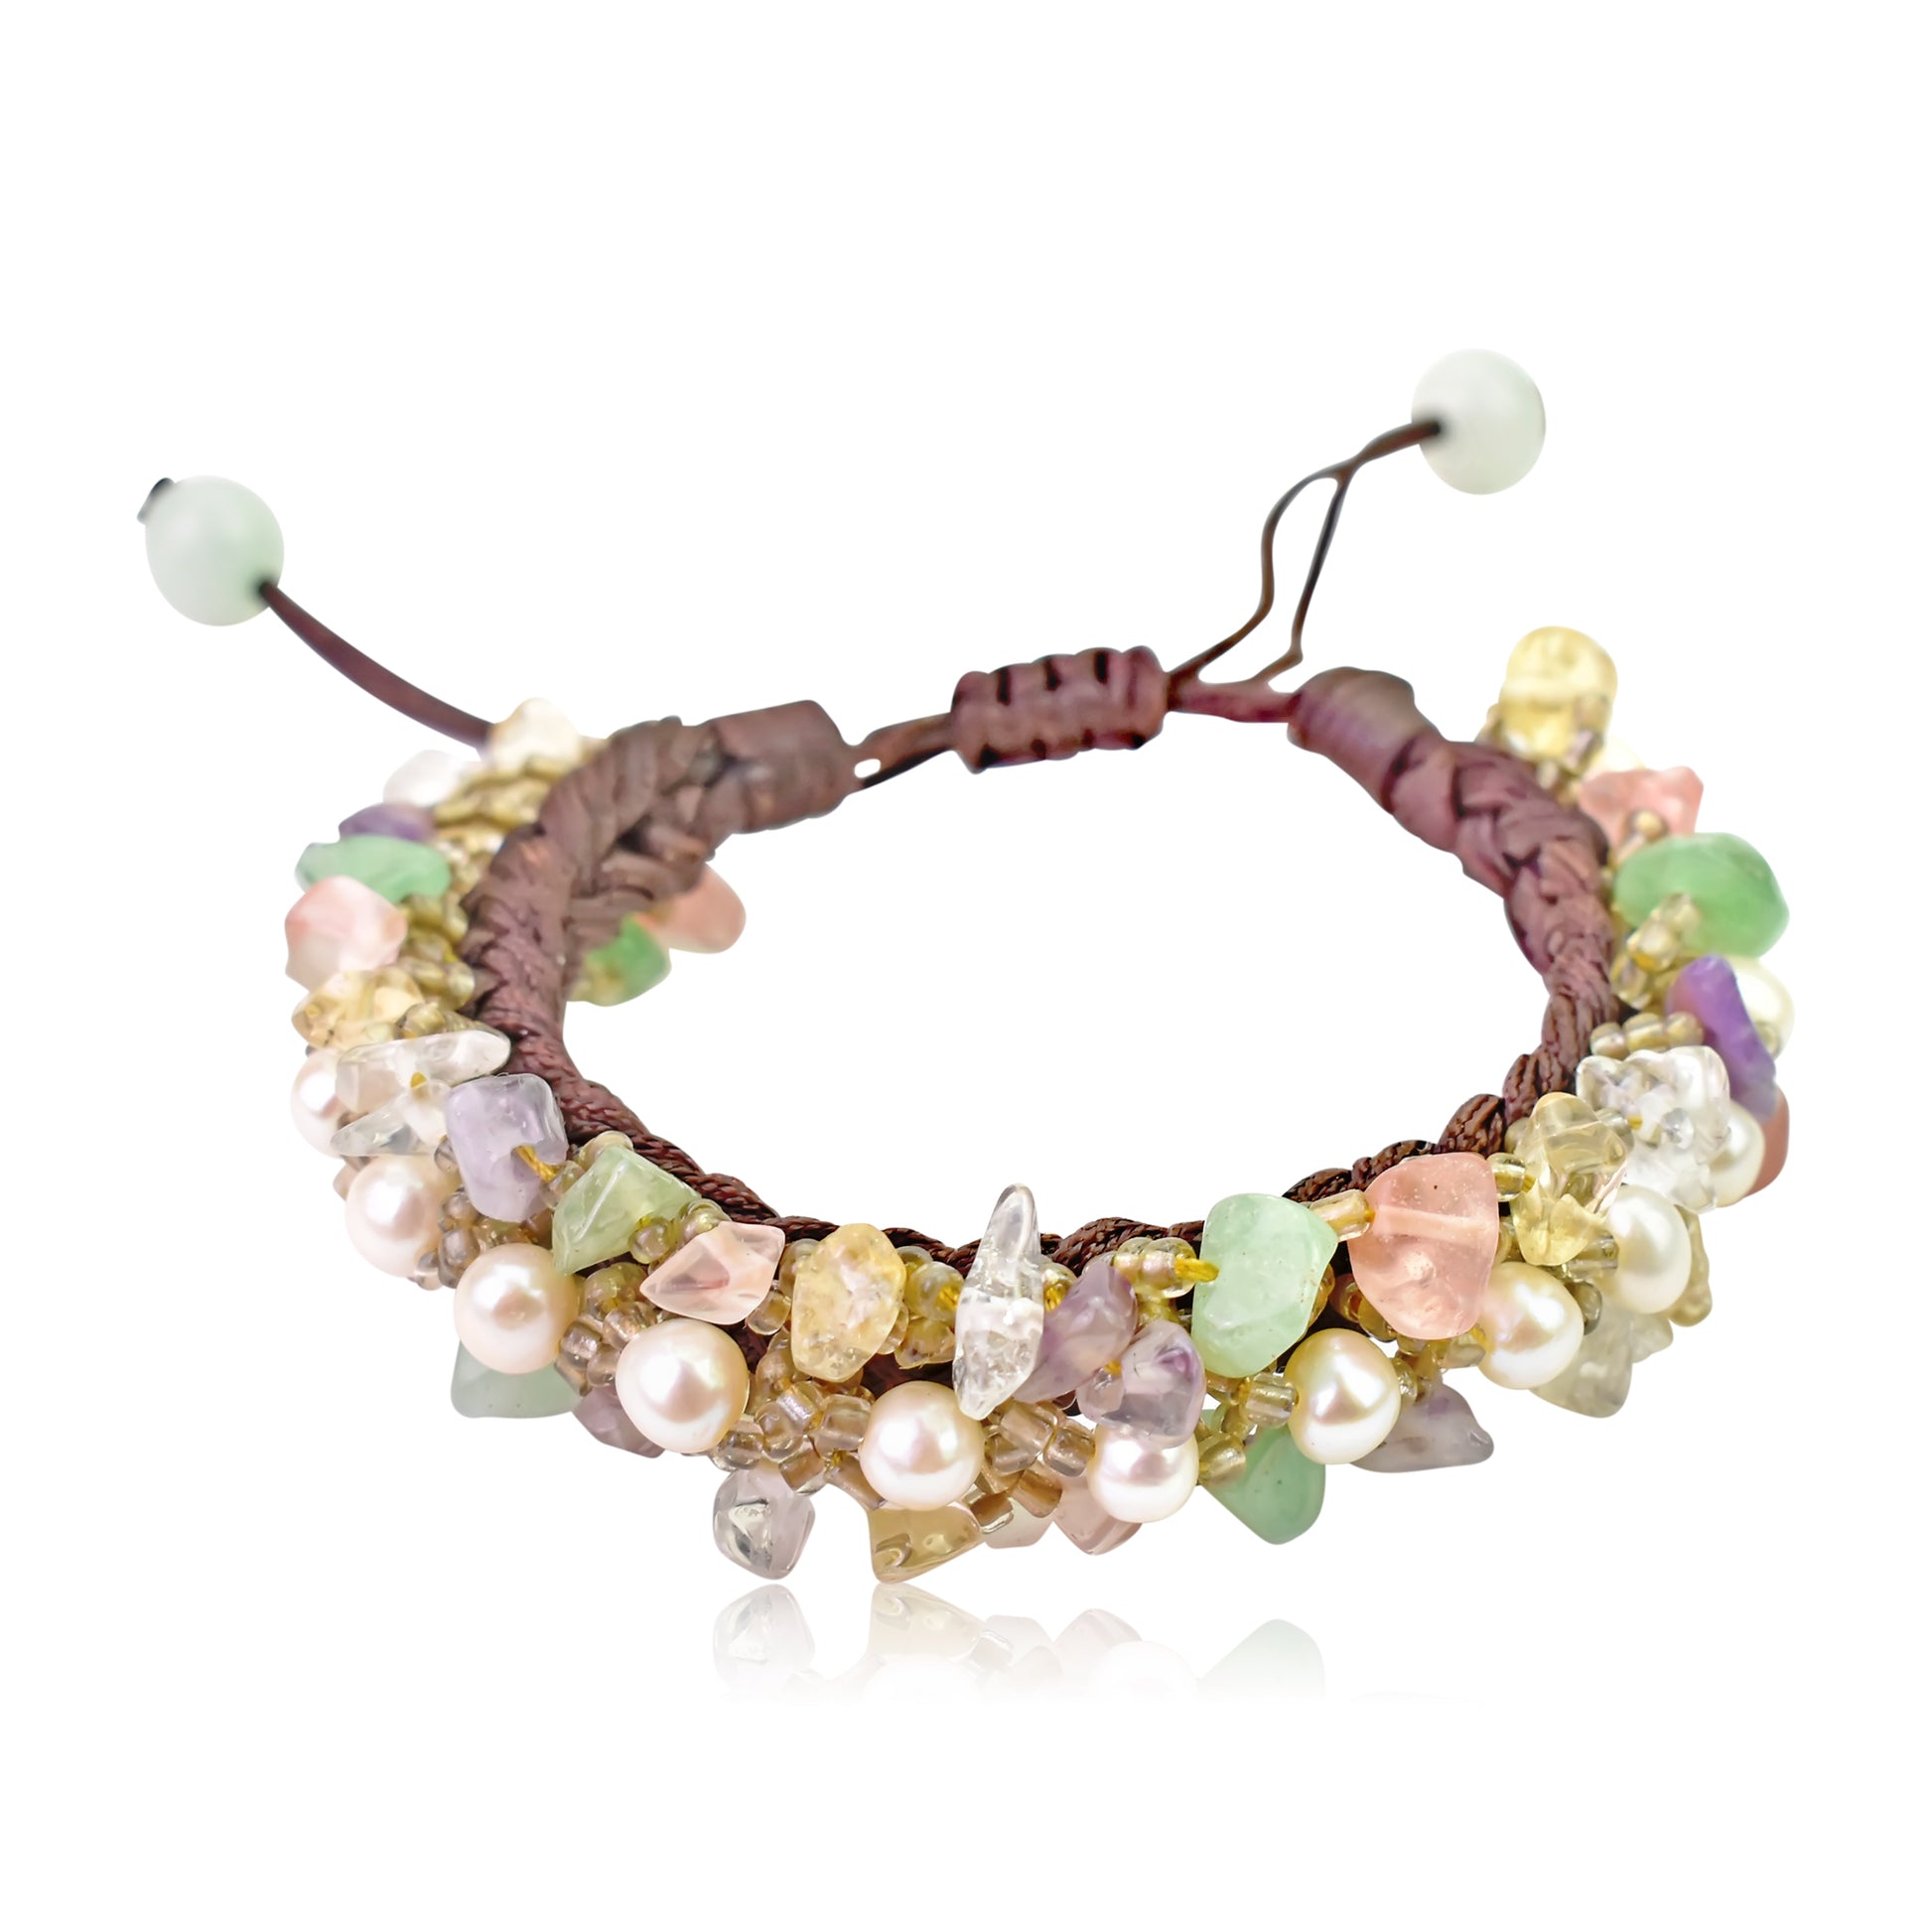 Shine Bright with Massive Pearl and Colorful Gemstones Bracelet made with Brown Cord